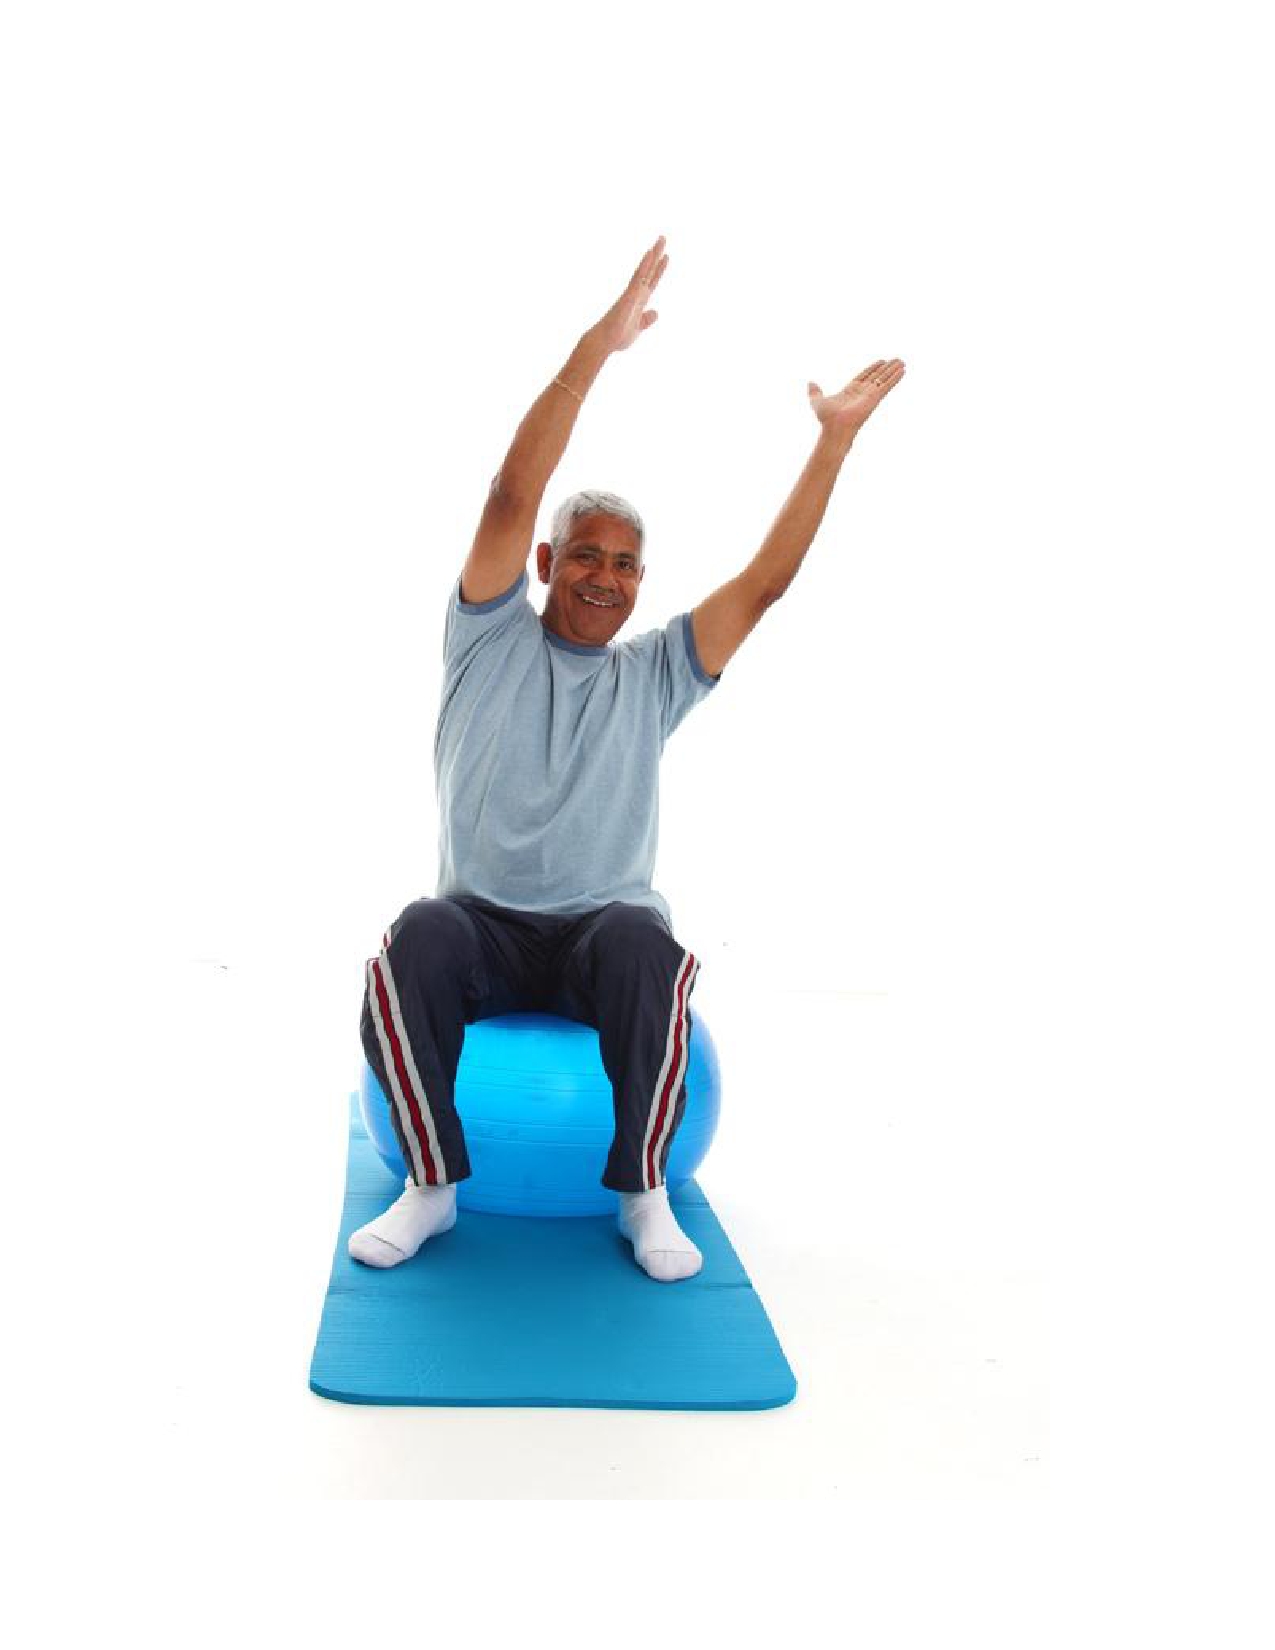 Group Exercise Clip Art Picture Of Man Exercising Clip 